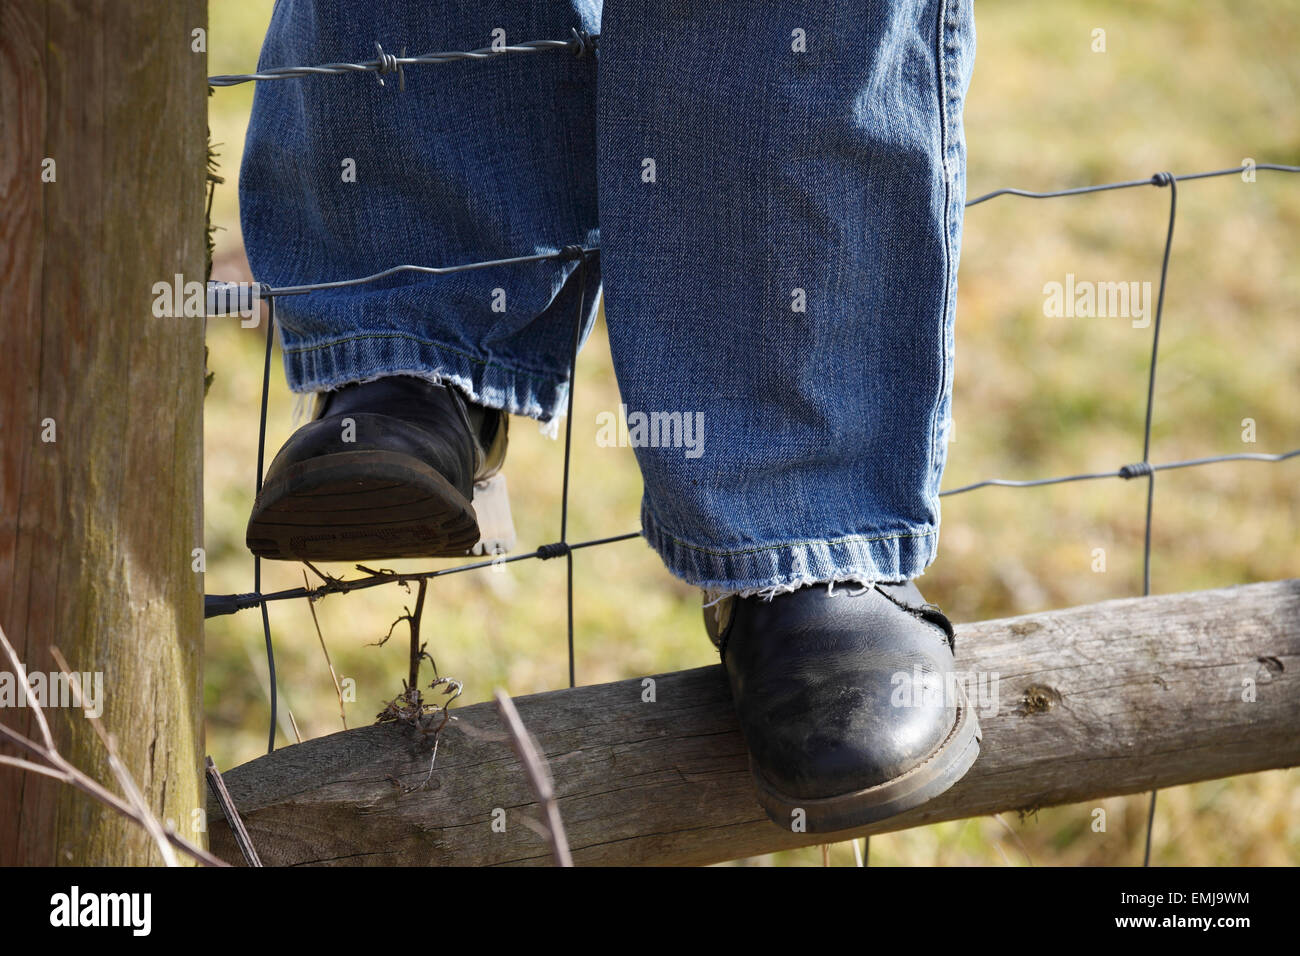 Woman in blue jeans climbing over a fence with barbed wire on a country  walk Stock Photo - Alamy